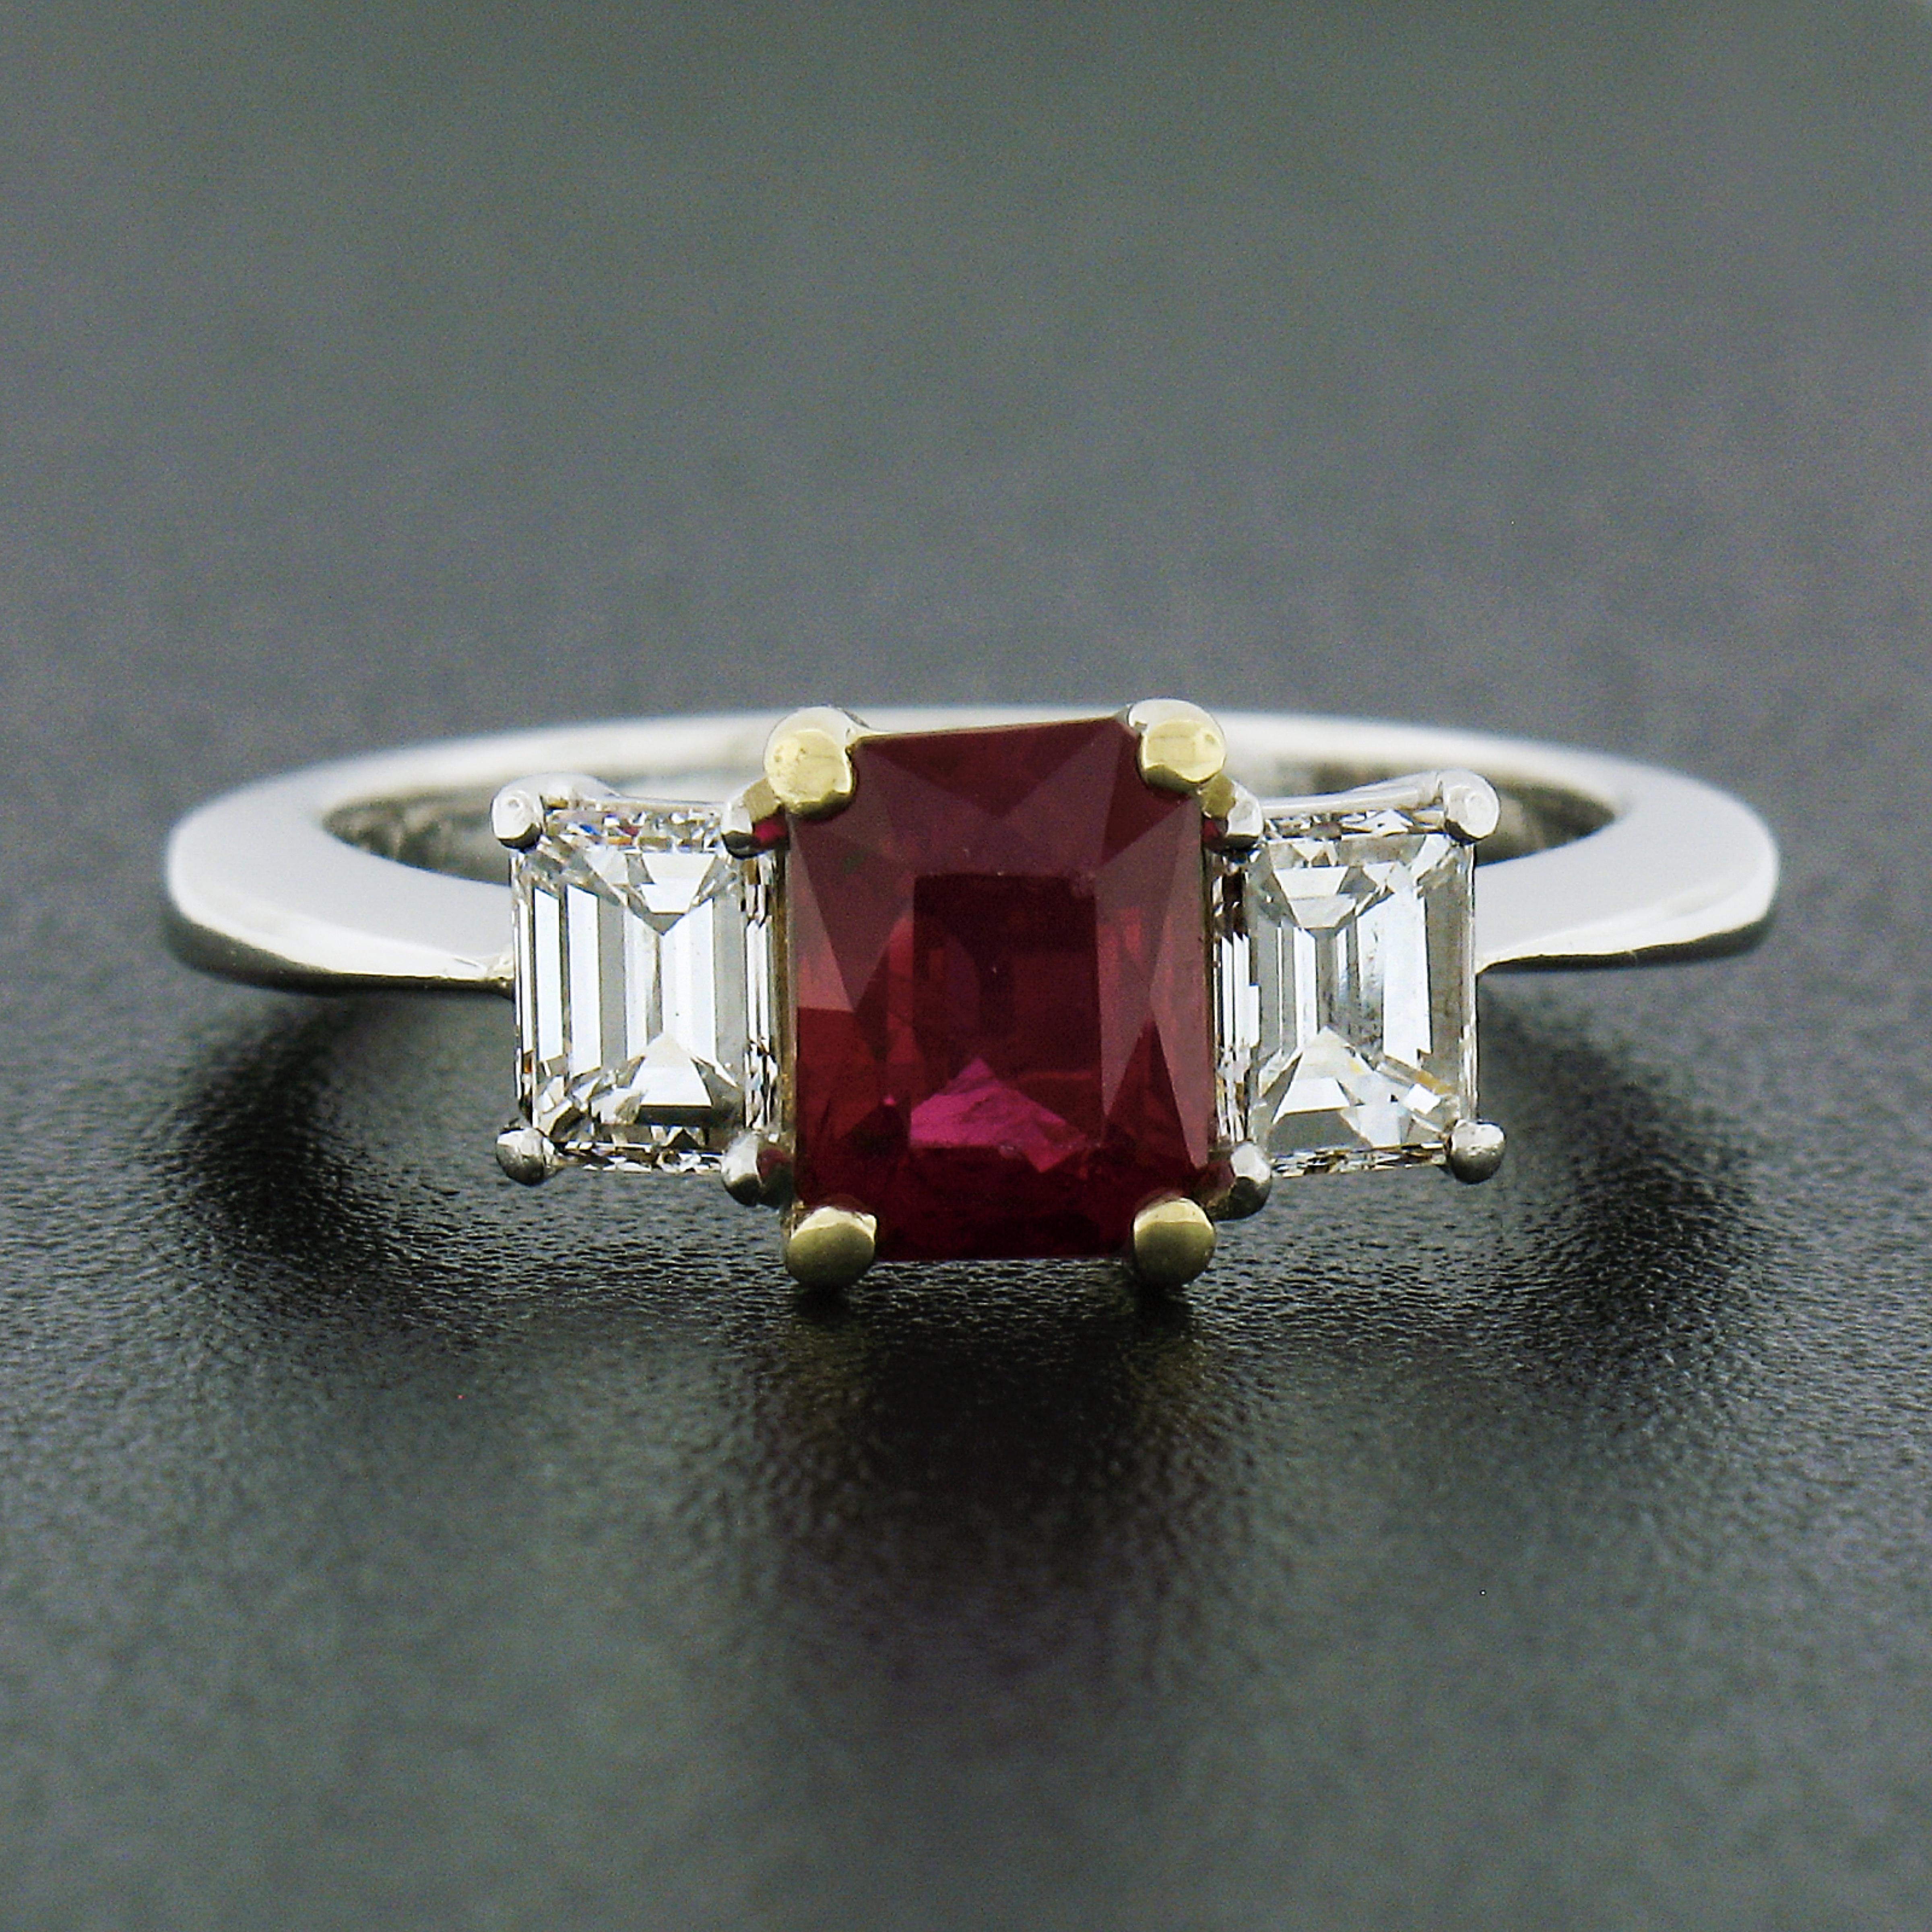 You are looking at a classically styled ruby and diamond three stone engagement ring crafted in solid platinum, and features a gorgeous, GIA certified, ruby solitaire neatly prong set at the center in a yellow gold basket setting. This center stone